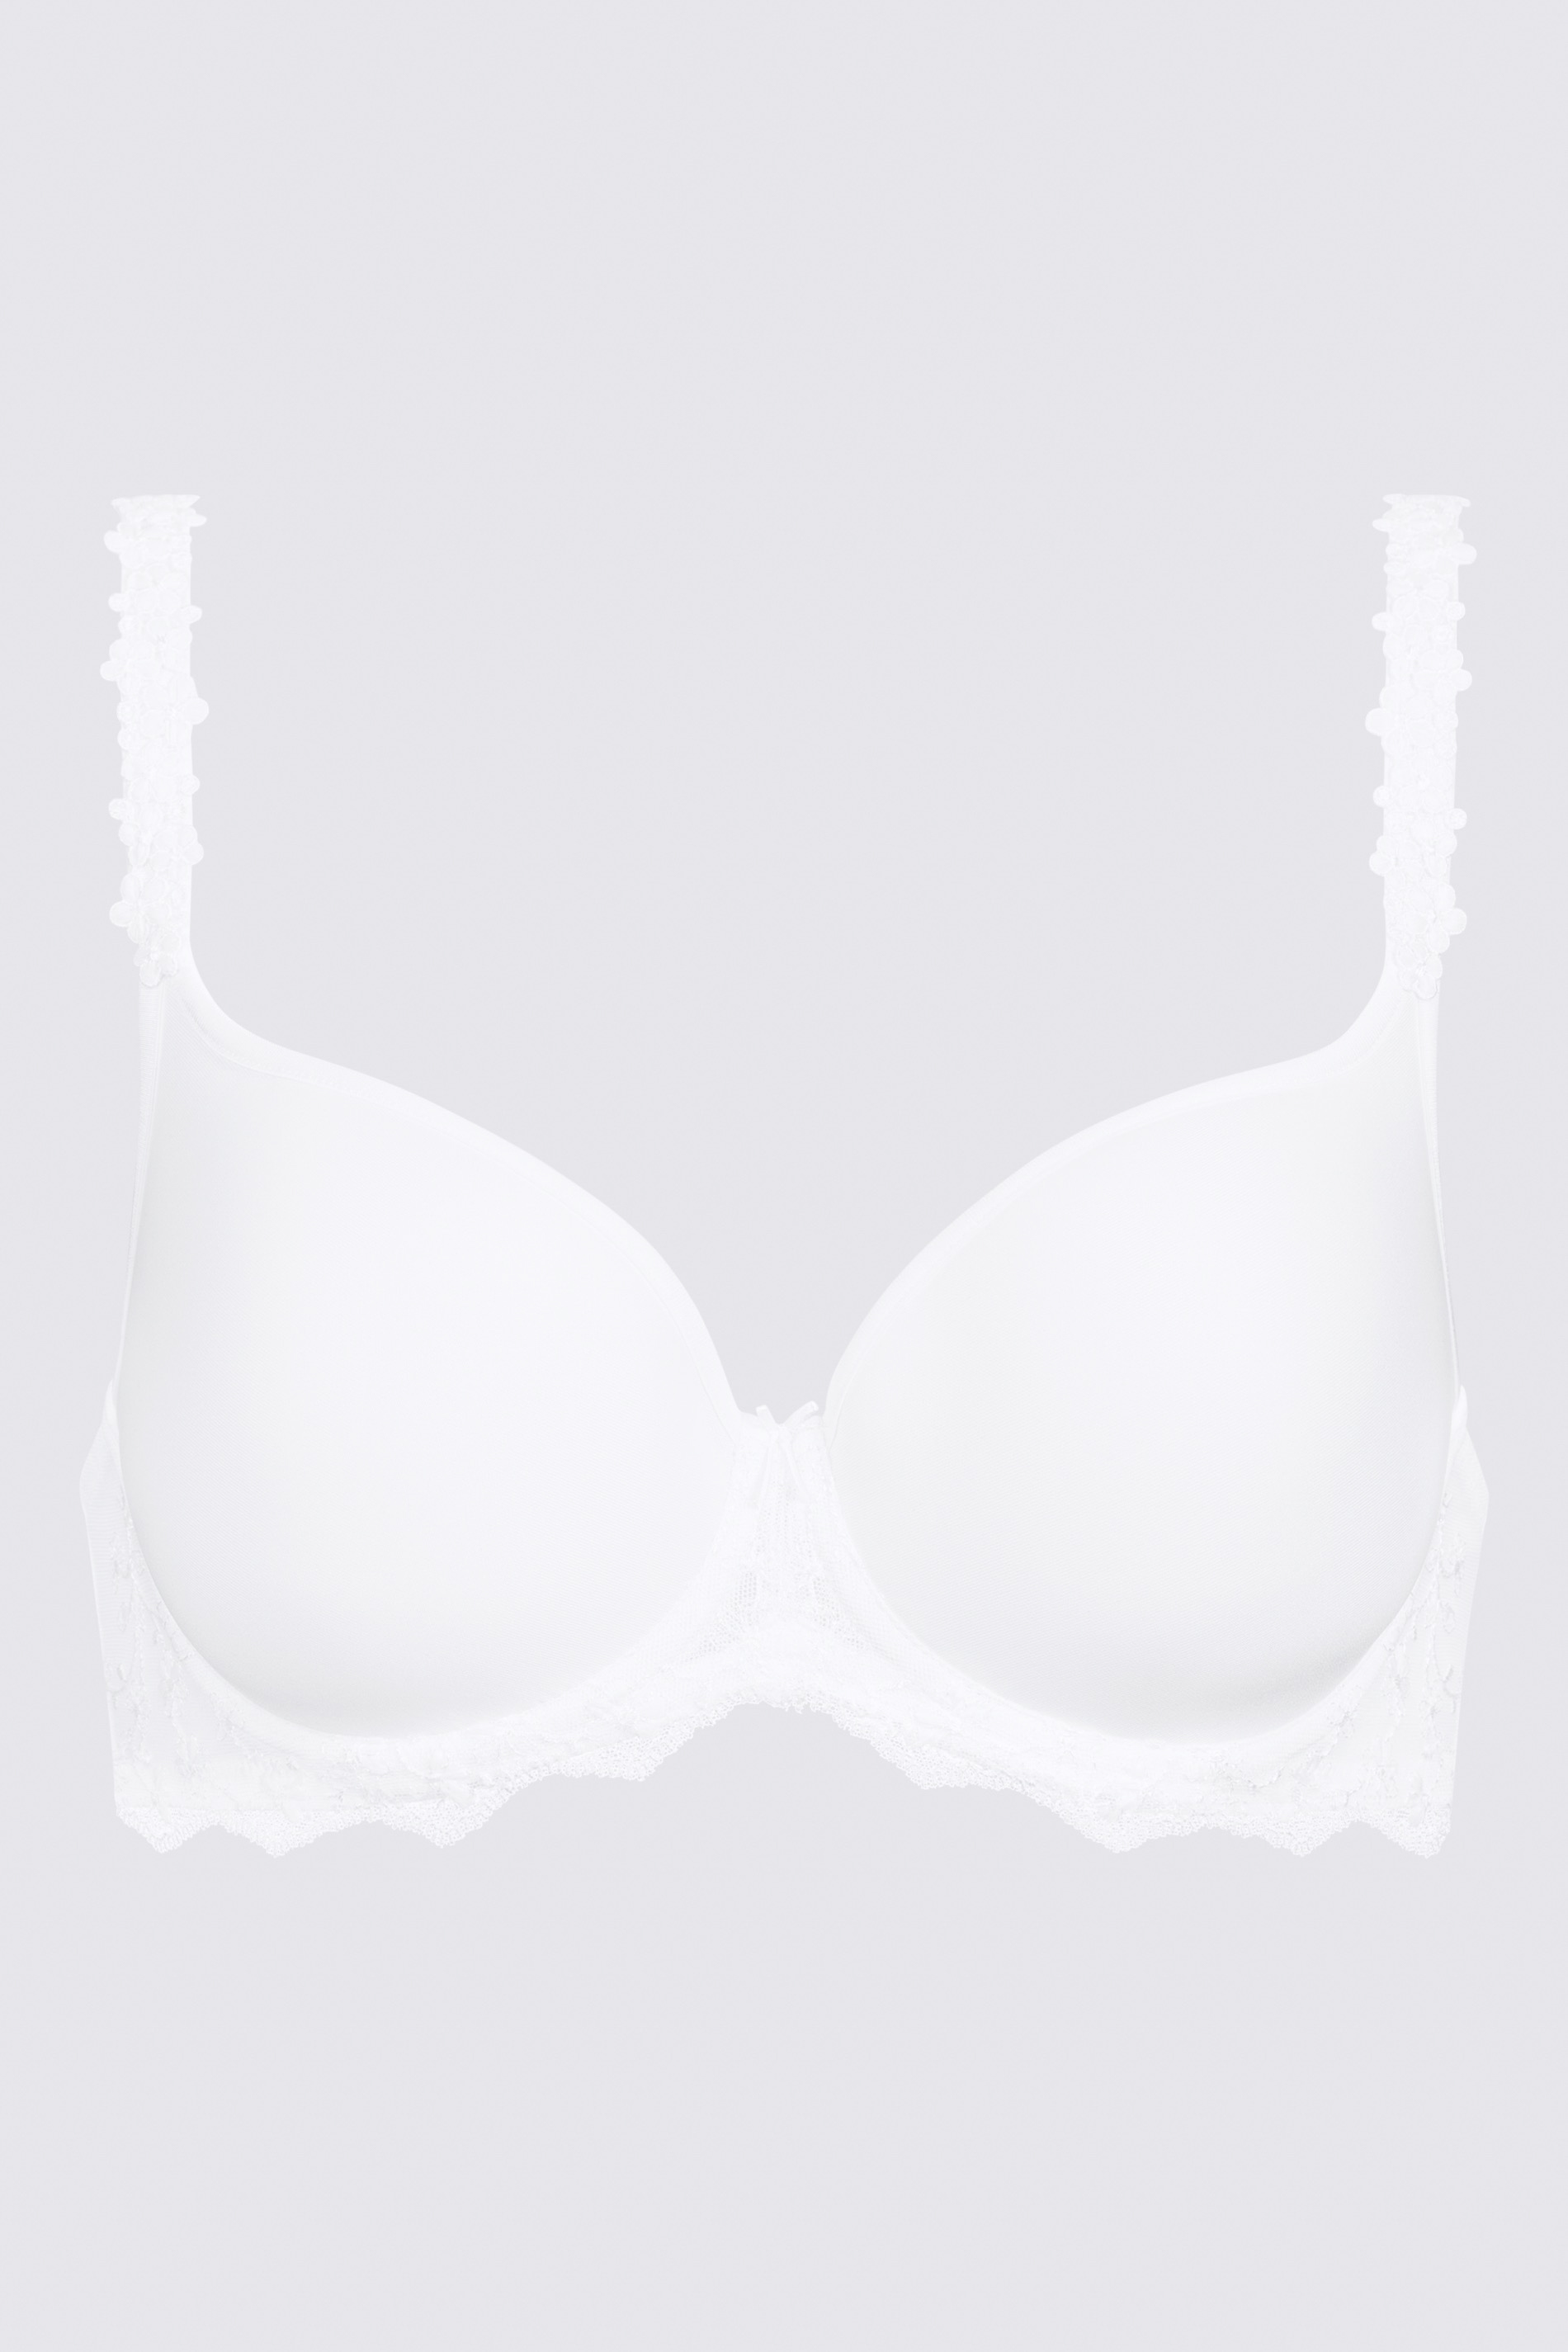 Spacer bra | Full Cup Serie Delightful Uitknippen | mey®